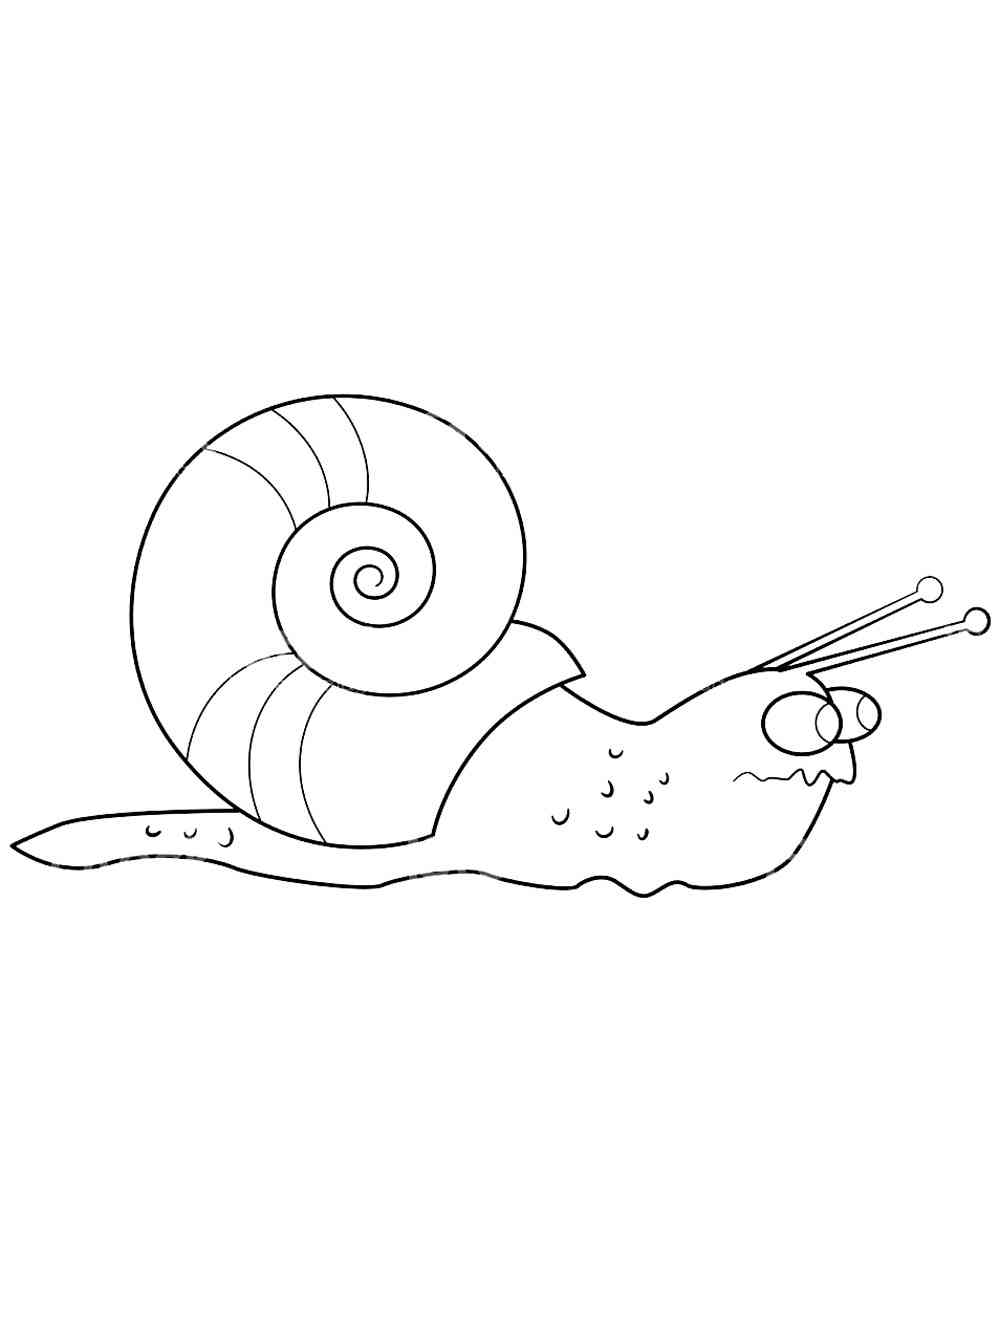 Scary Snail coloring page